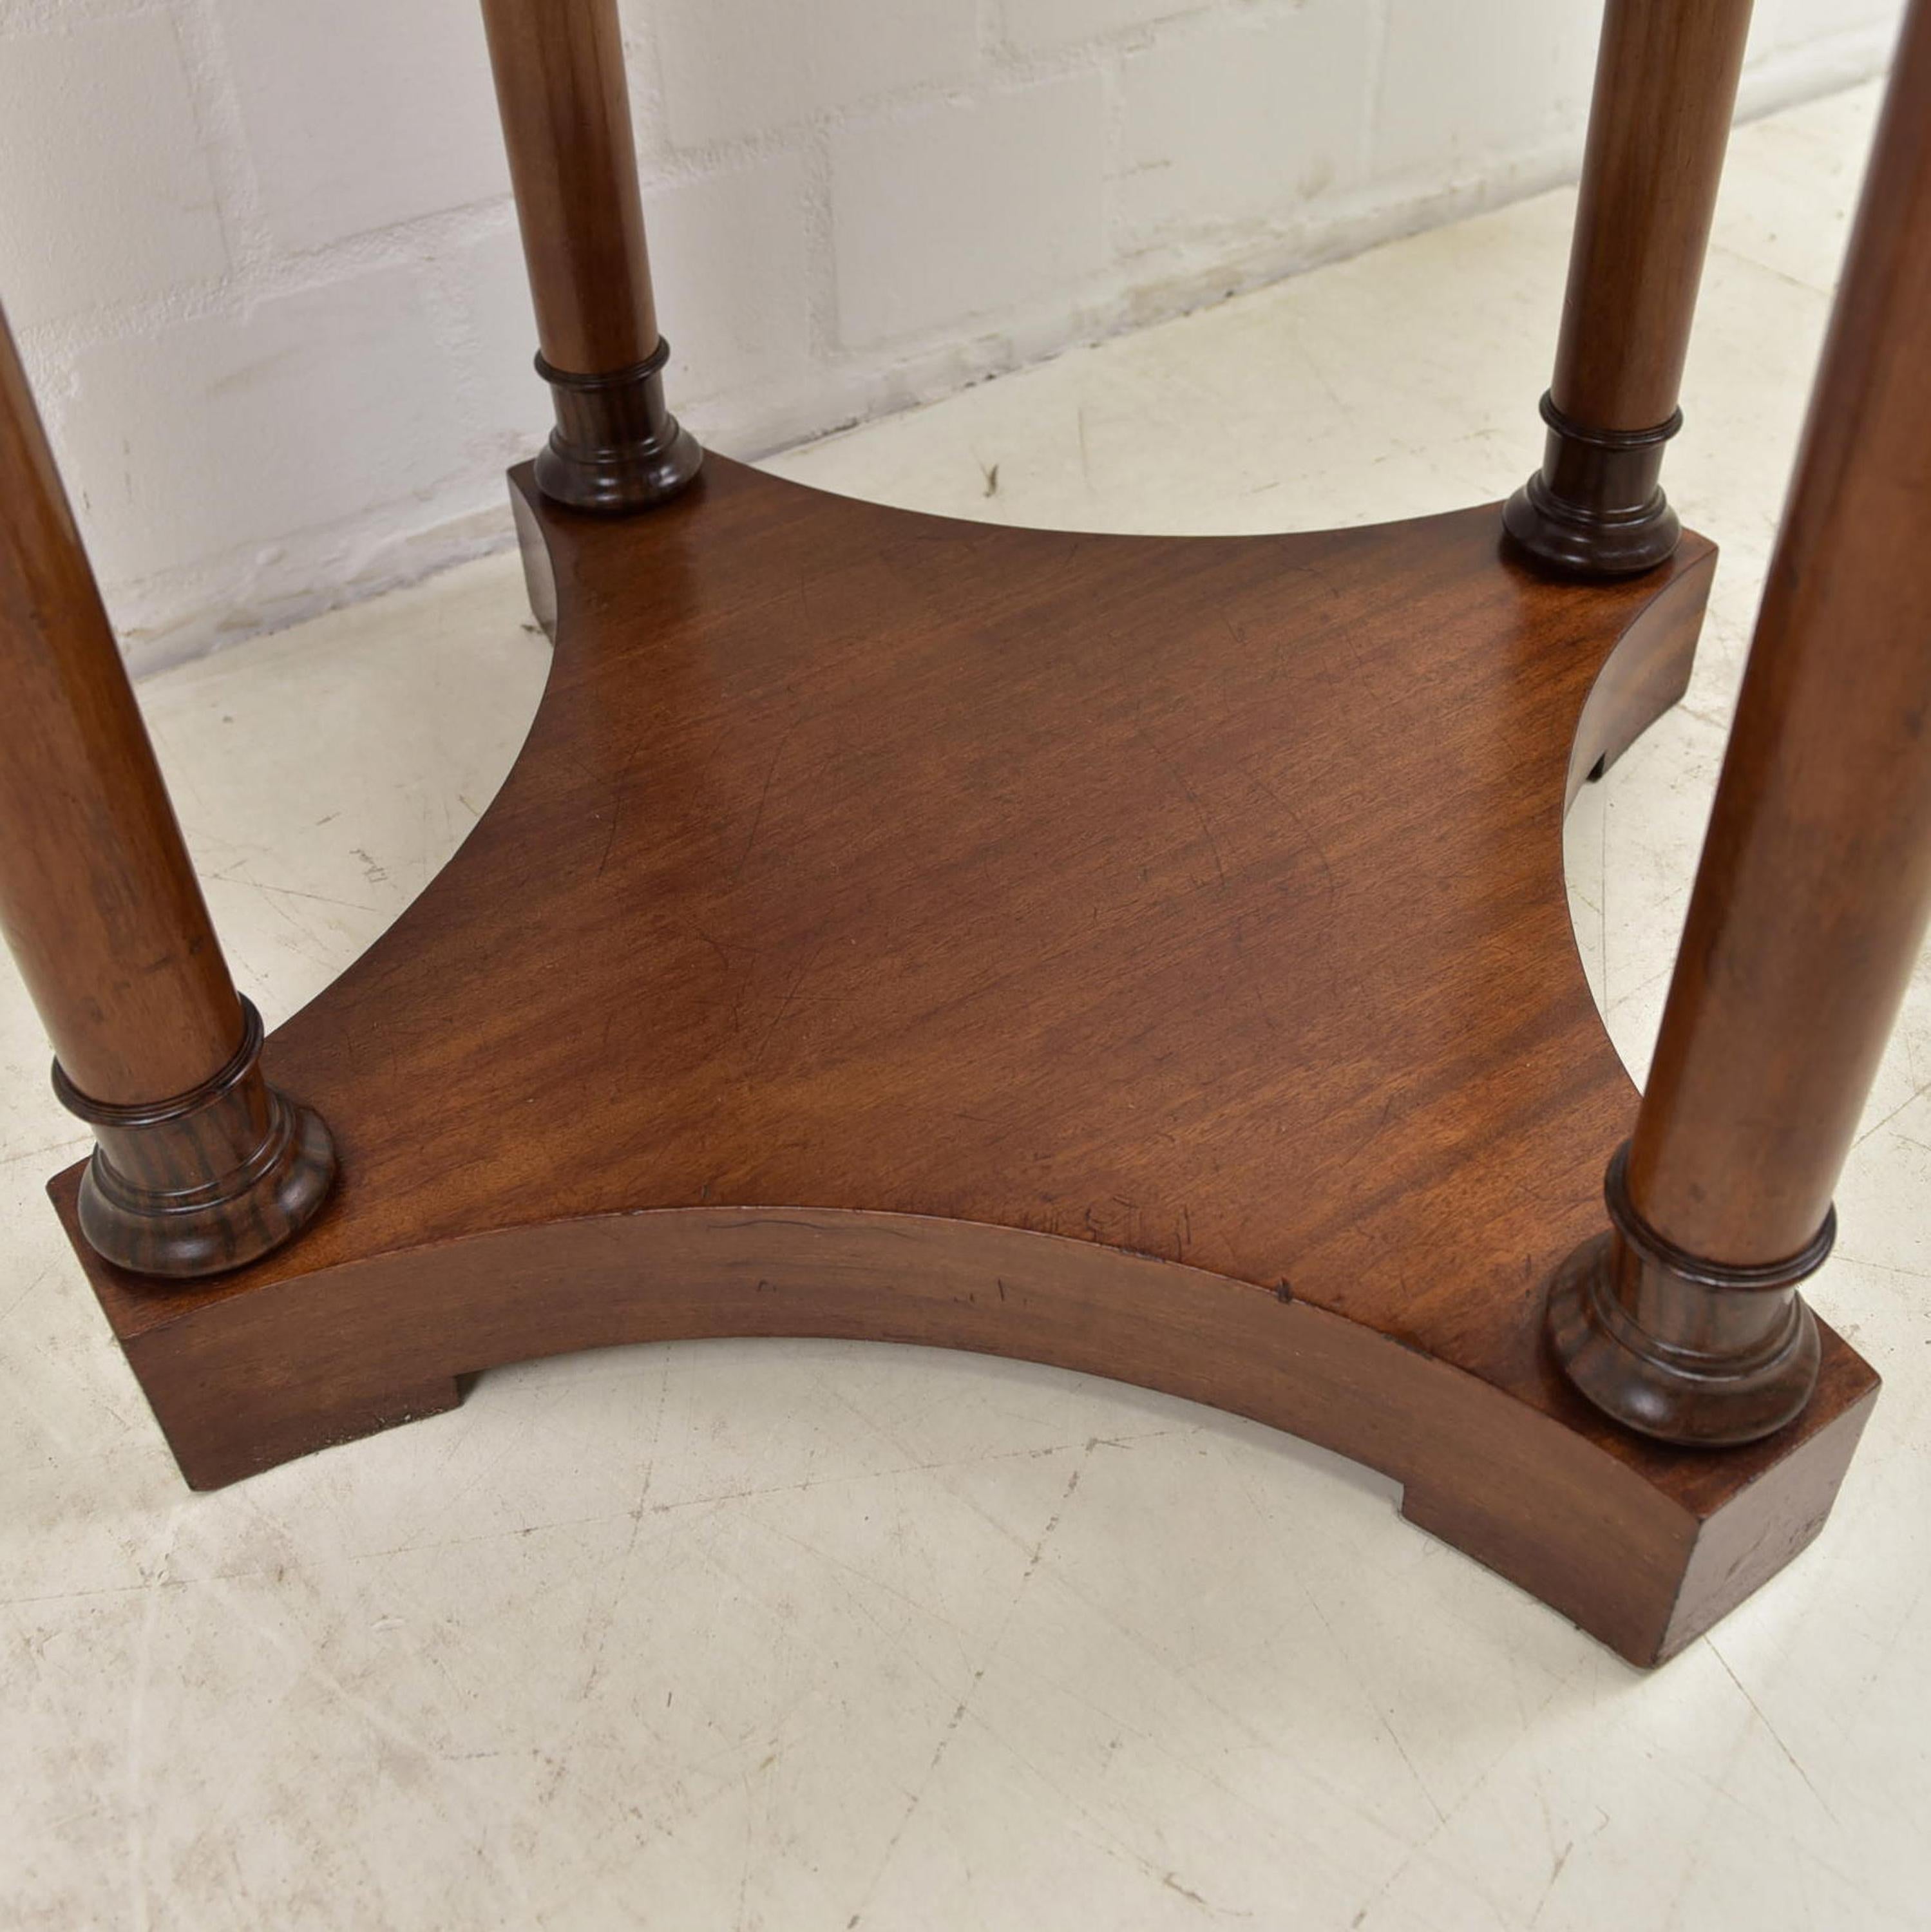 20th Century Art Deco Round Side Table / Coffee Table in Mahogany, circa 1925